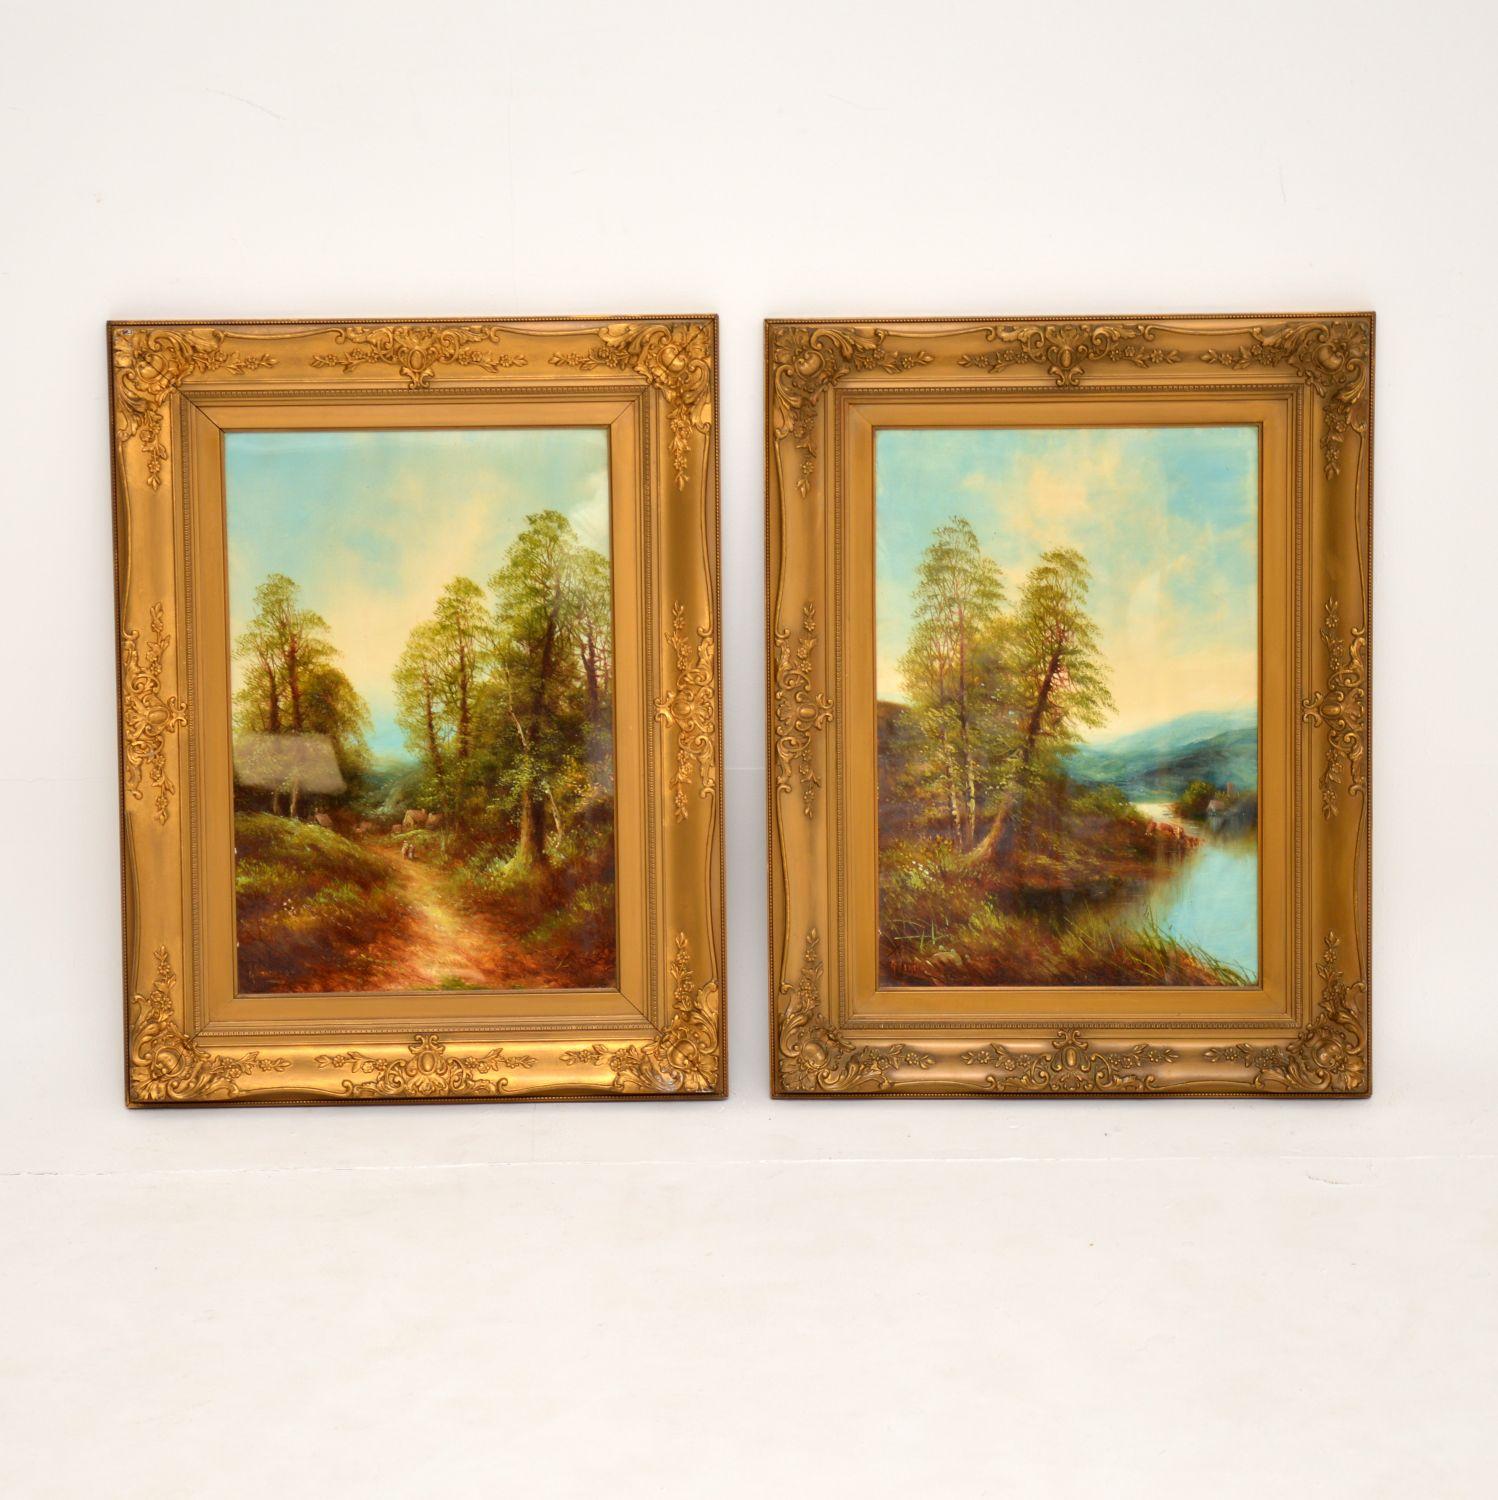 A beautiful pair of antique Victorian gilt framed oil paintings. These are signed by the well known artist George Jennings, they date from around the late 19th century.

They are beautifully executed, with gorgeous details and colours. They appear